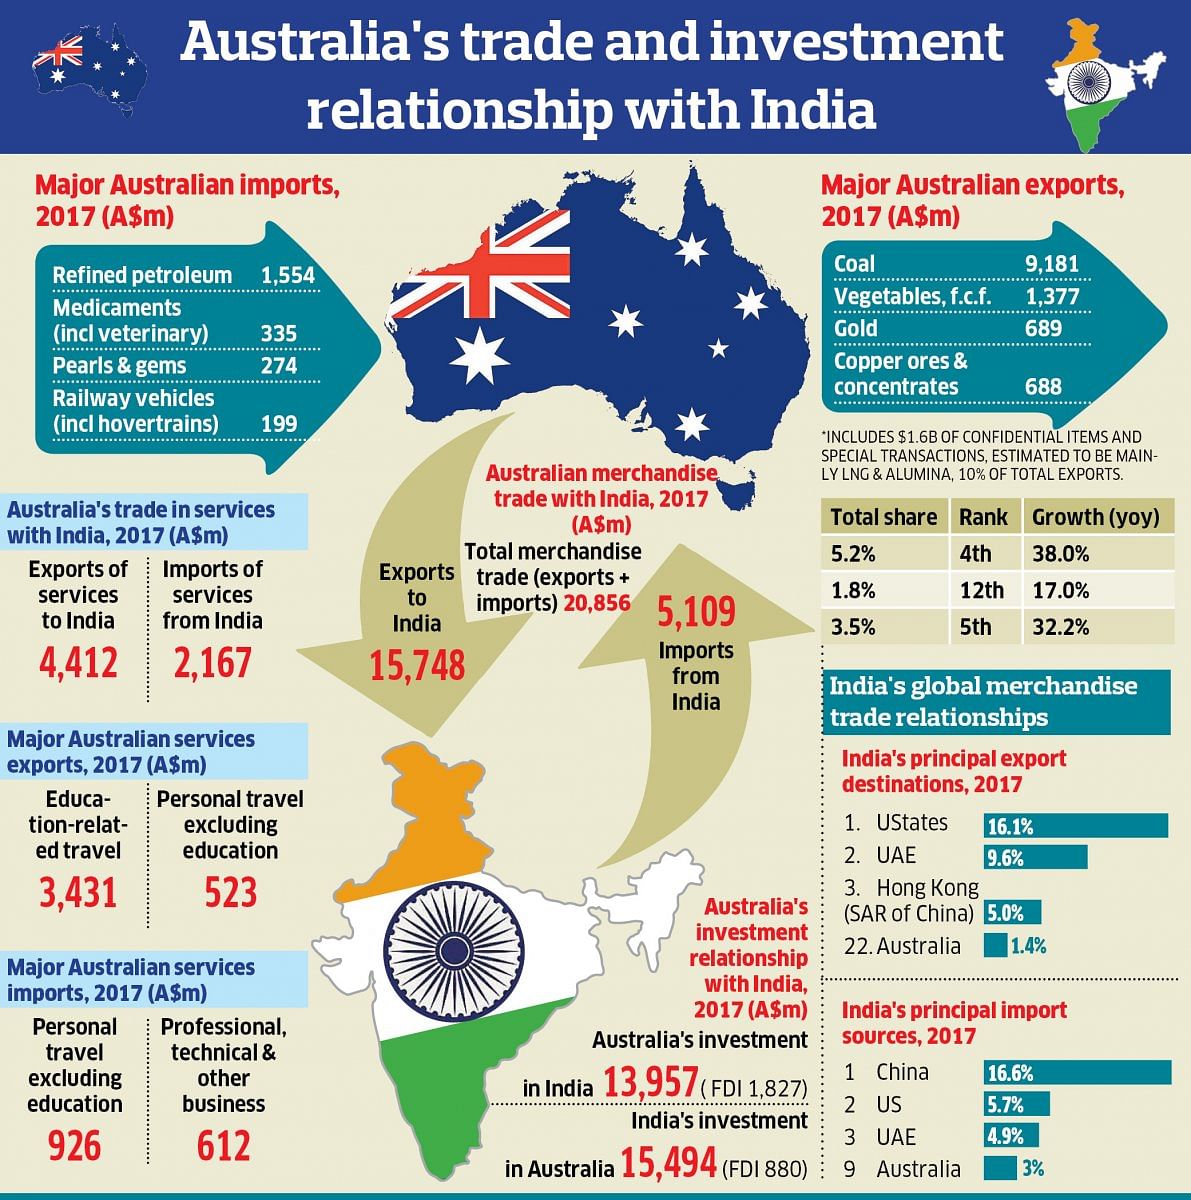 India’s and Australia’s merchandise trade stood at A$ 20,856 million (almost Rs 1.08 lakh crore) for 2017. DH Infographics: Gangadhar R